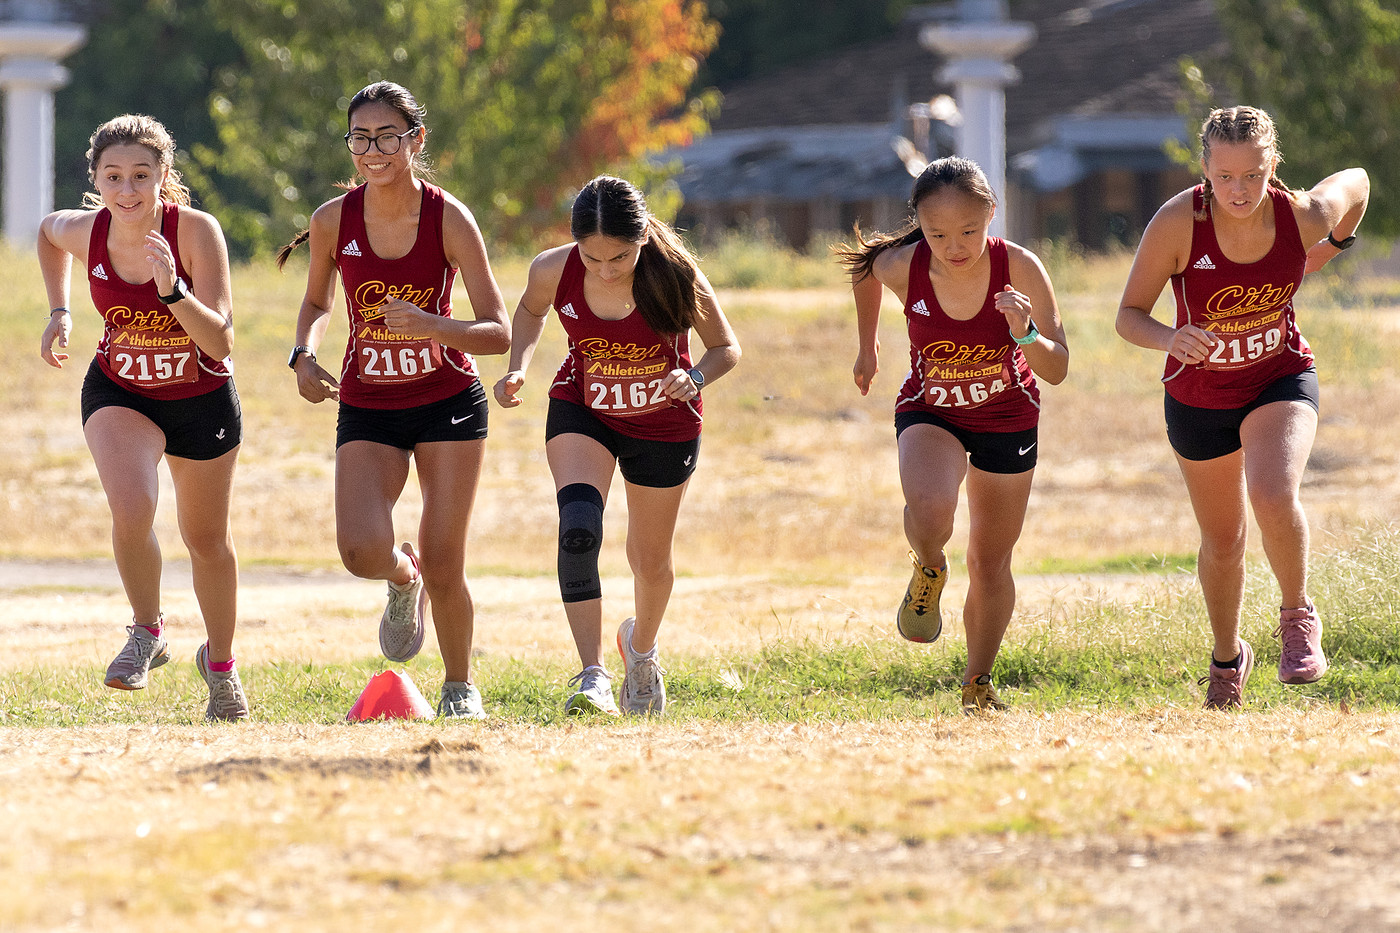 The Panthers women's cross country team finishes in 7th place at the Kim Duyst Invitational